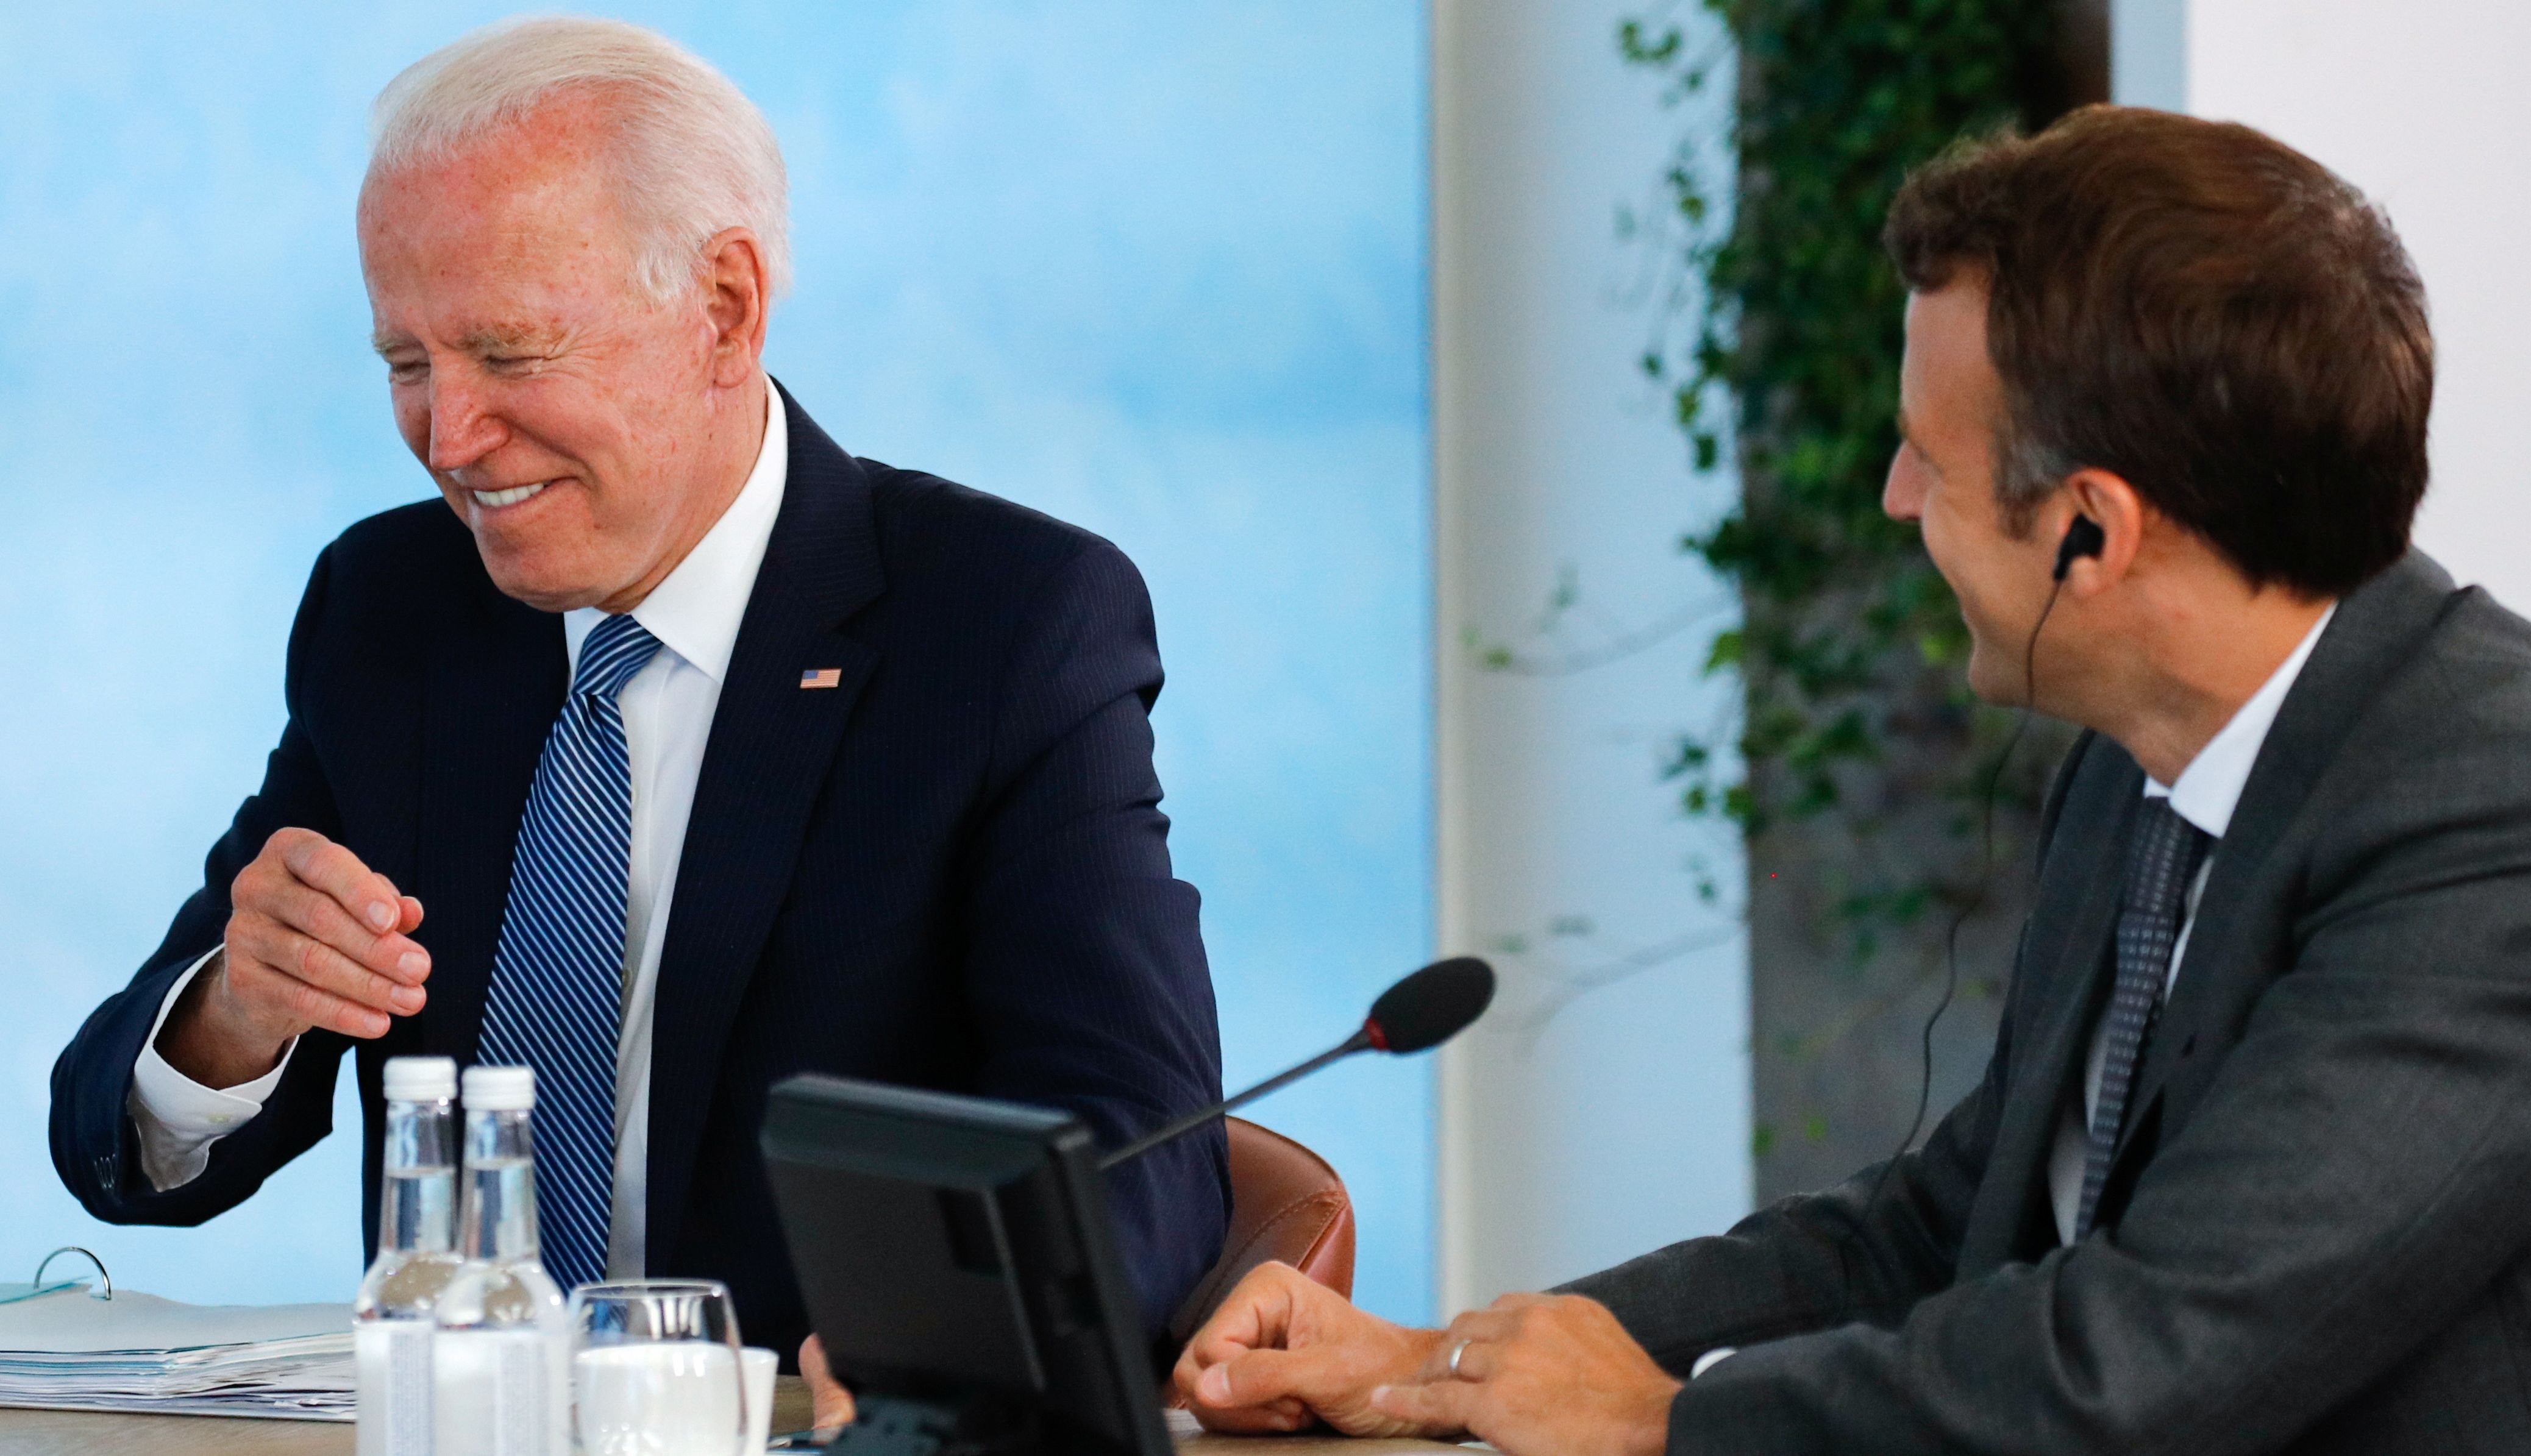 US President Joe Biden and French President Emmanuel Macron attend a plenary session, during the G7 summit.